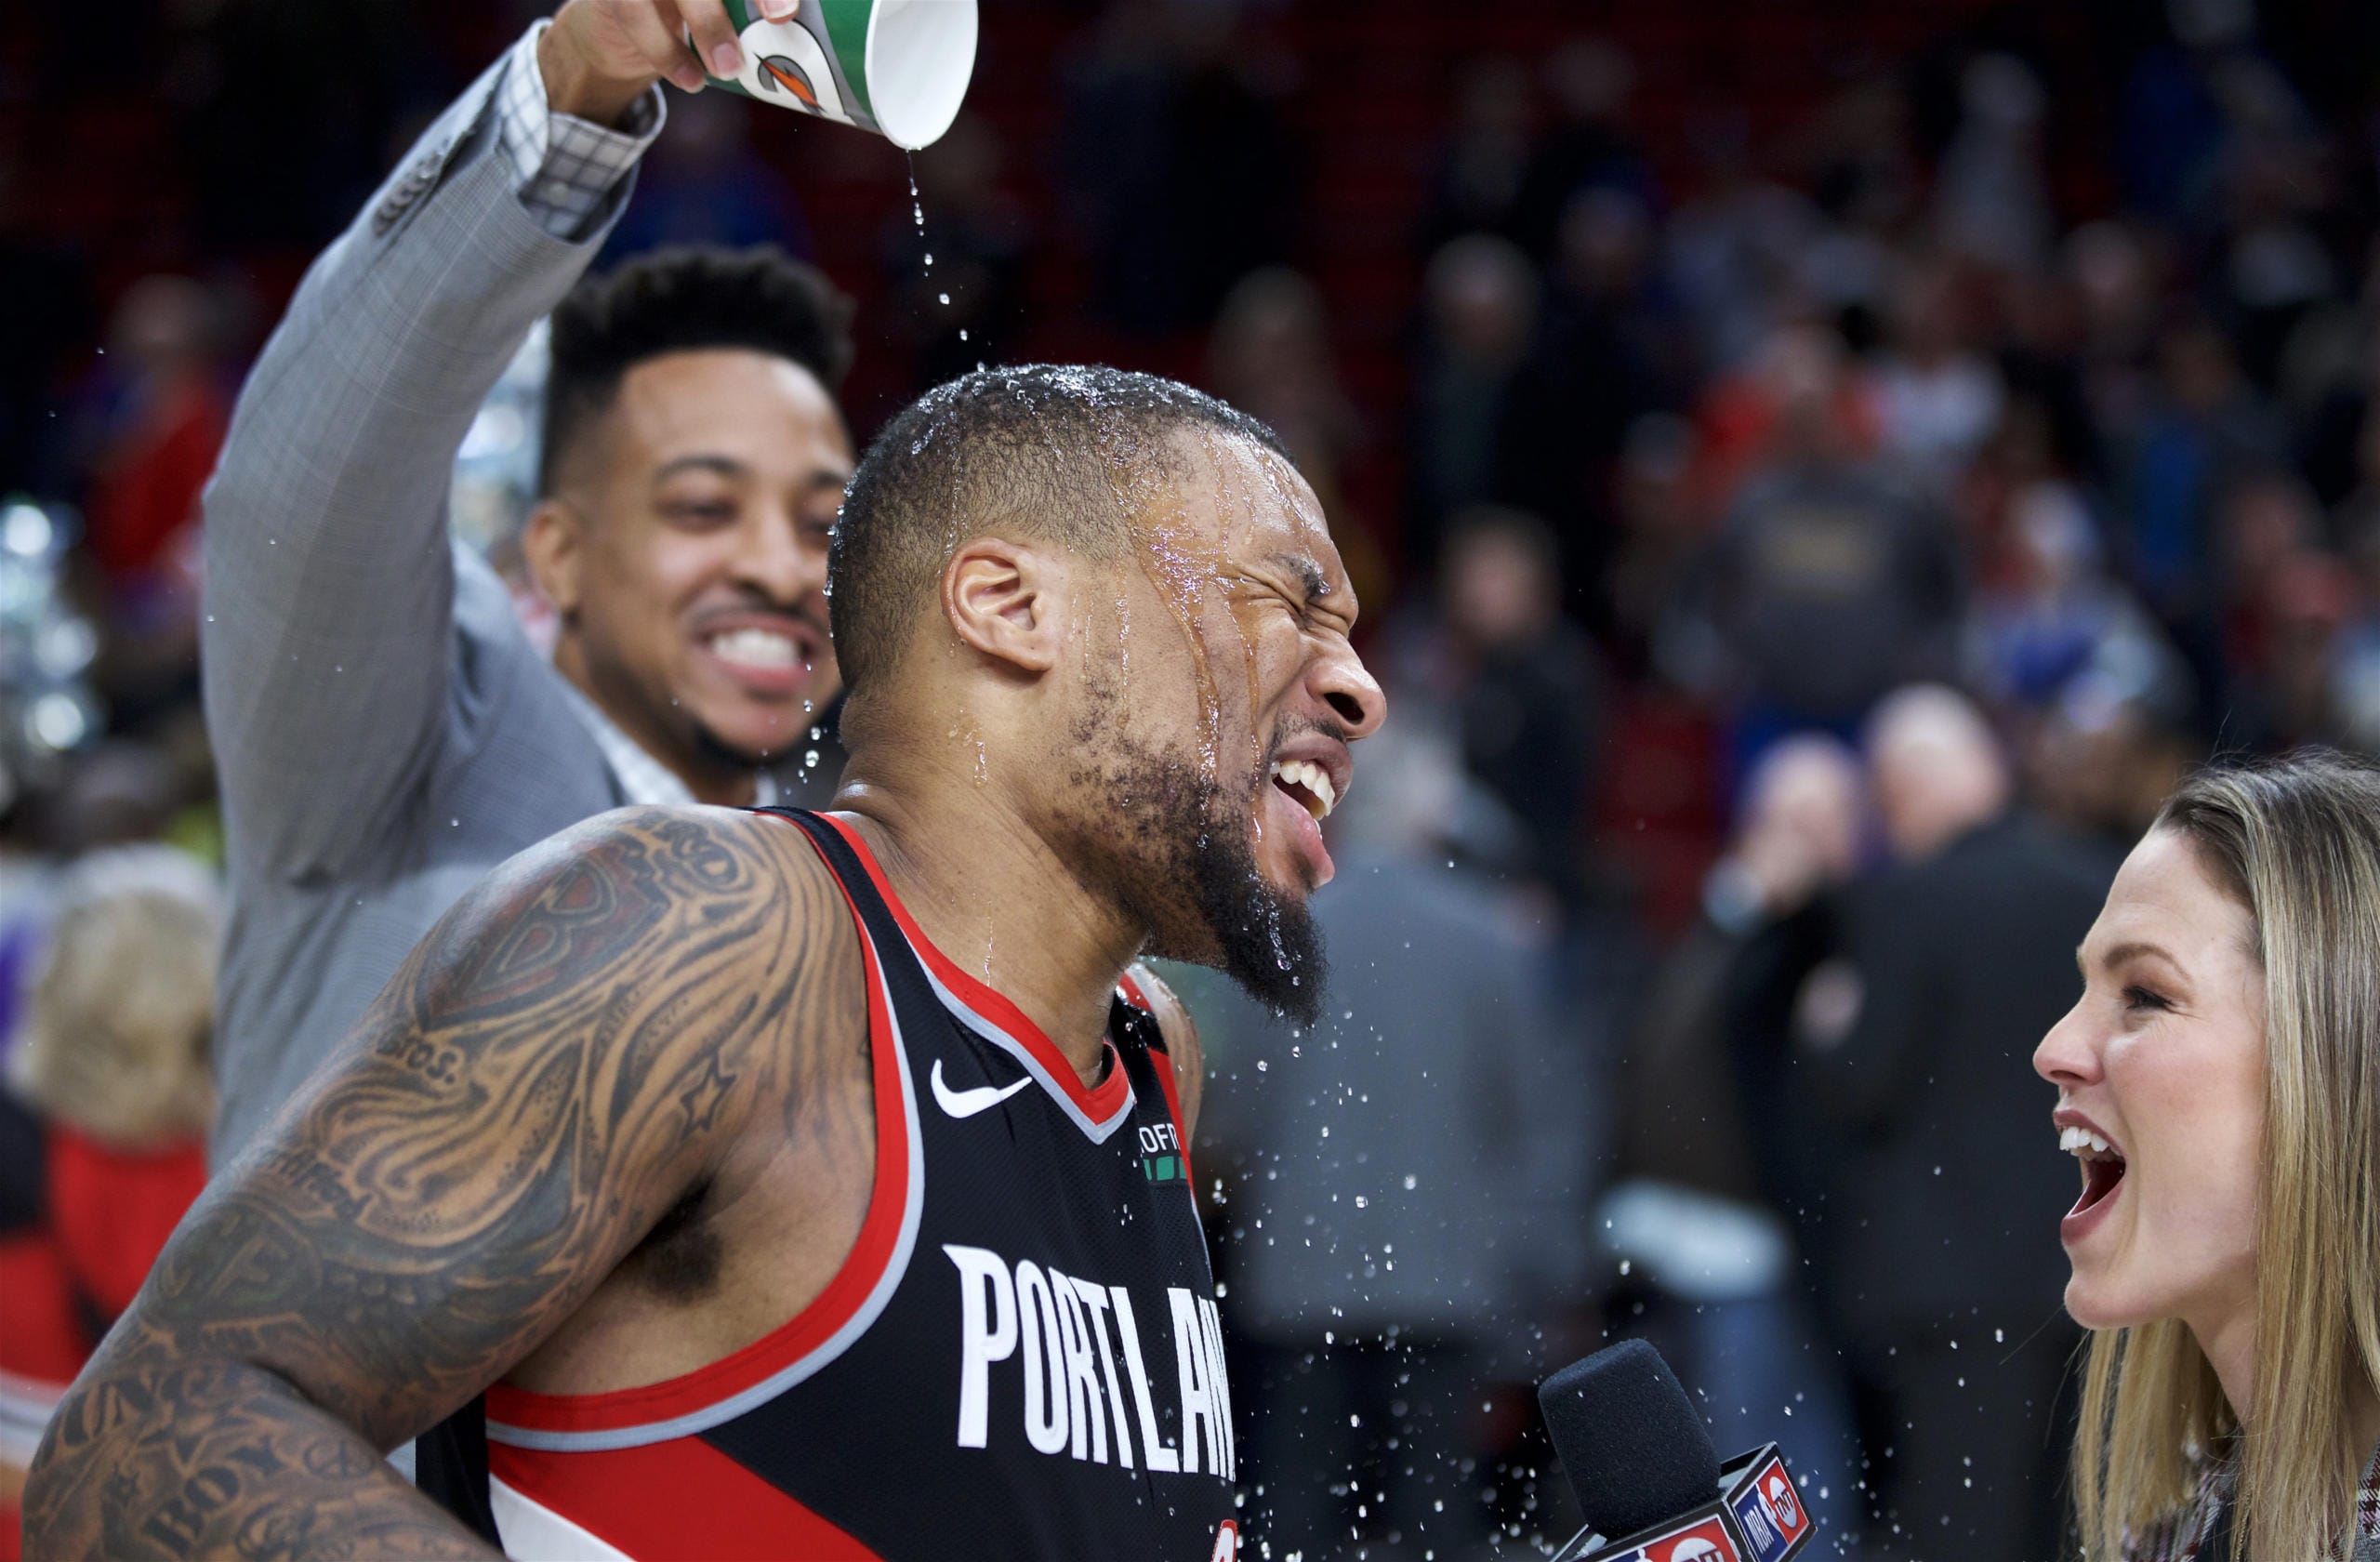 Portland Trail Blazers guard Damian Lillard, center, gets doused by guard CJ McCollum after Lillard scored 61 points against the Golden State Warriors in an NBA basketball game in Portland, Ore., Monday, Jan. 20, 2020. The Trail Blazers won 129-124 in overtime.